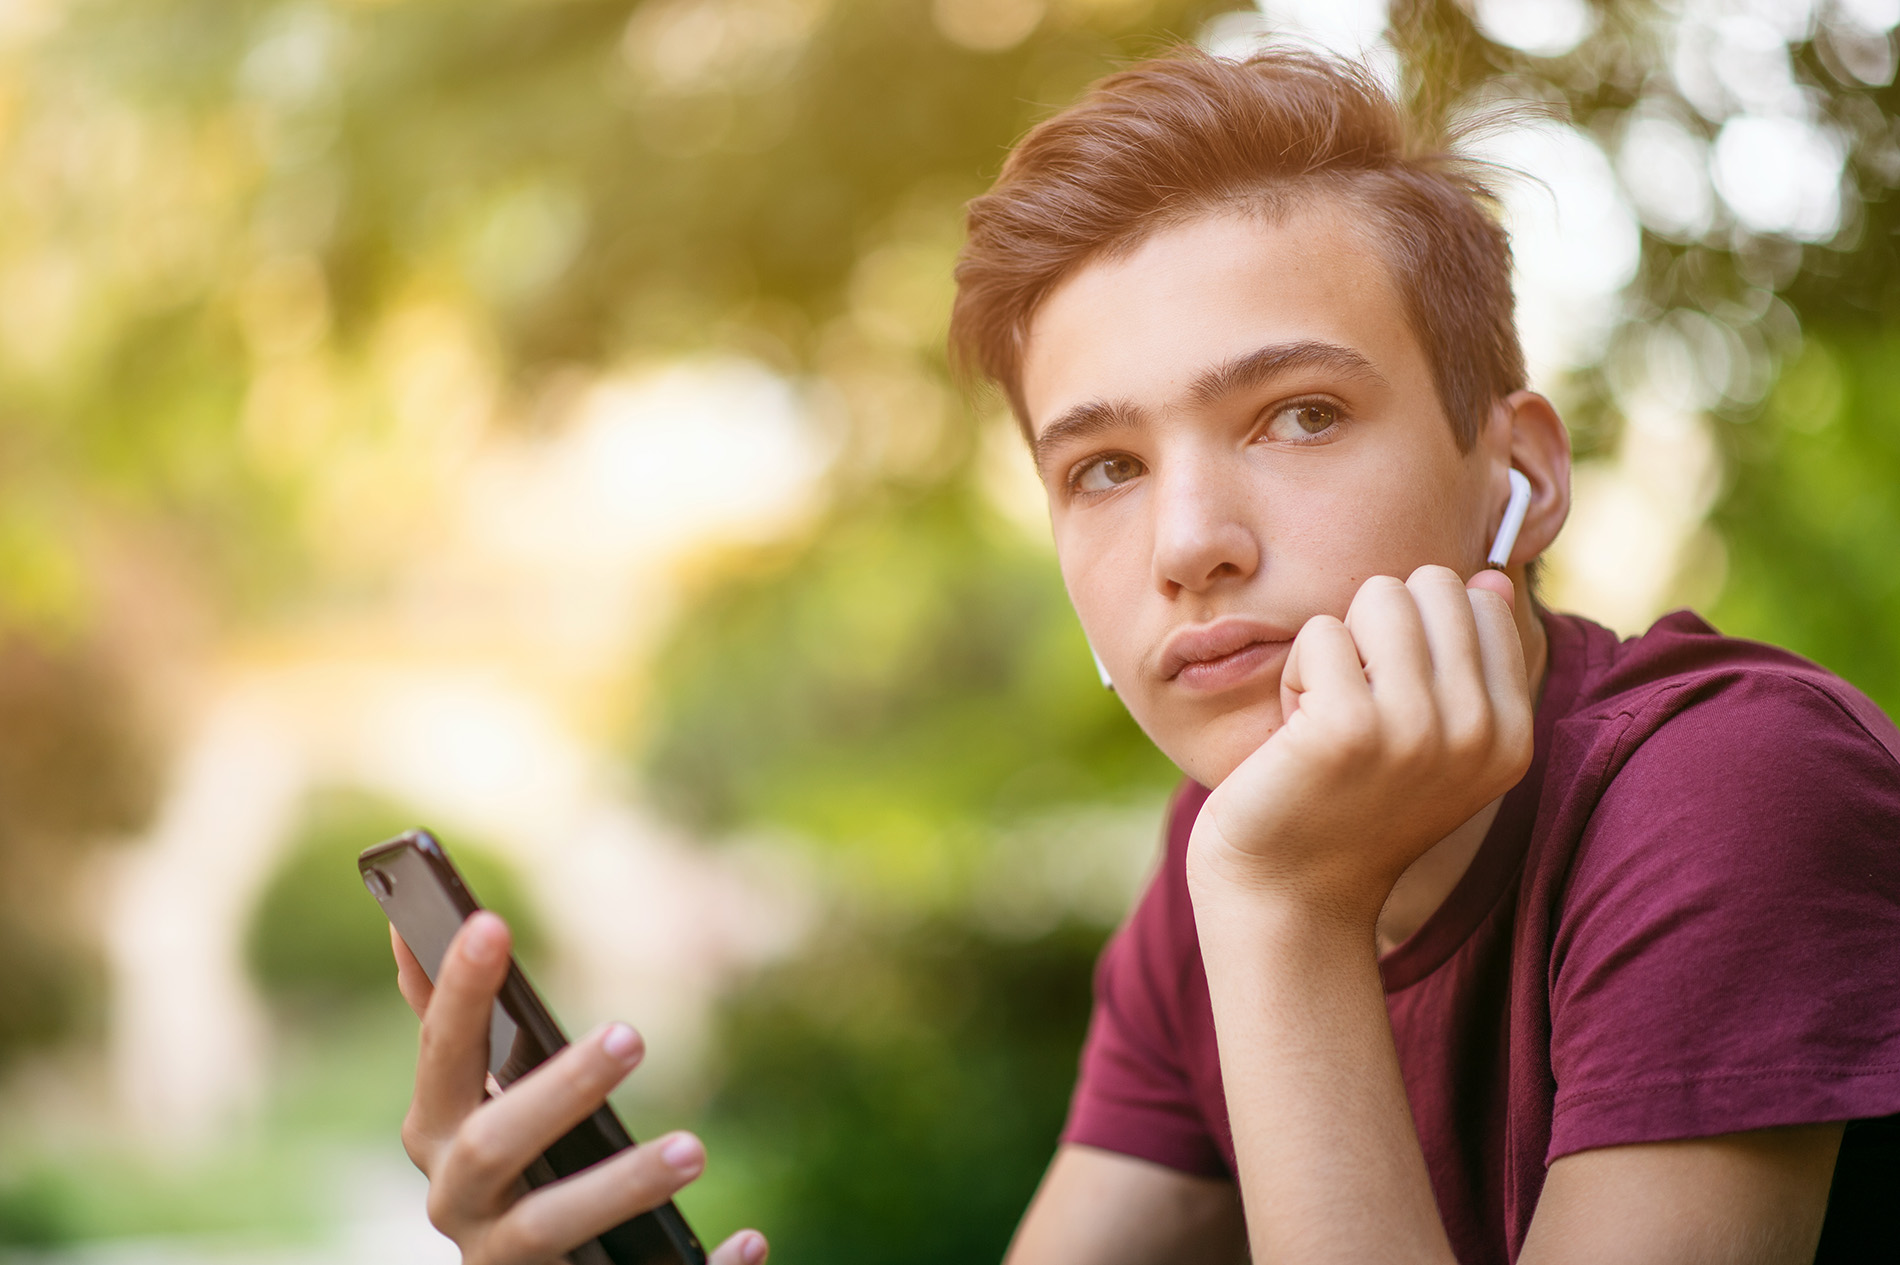 Pensive teenage boy sitting on bench with cell phone